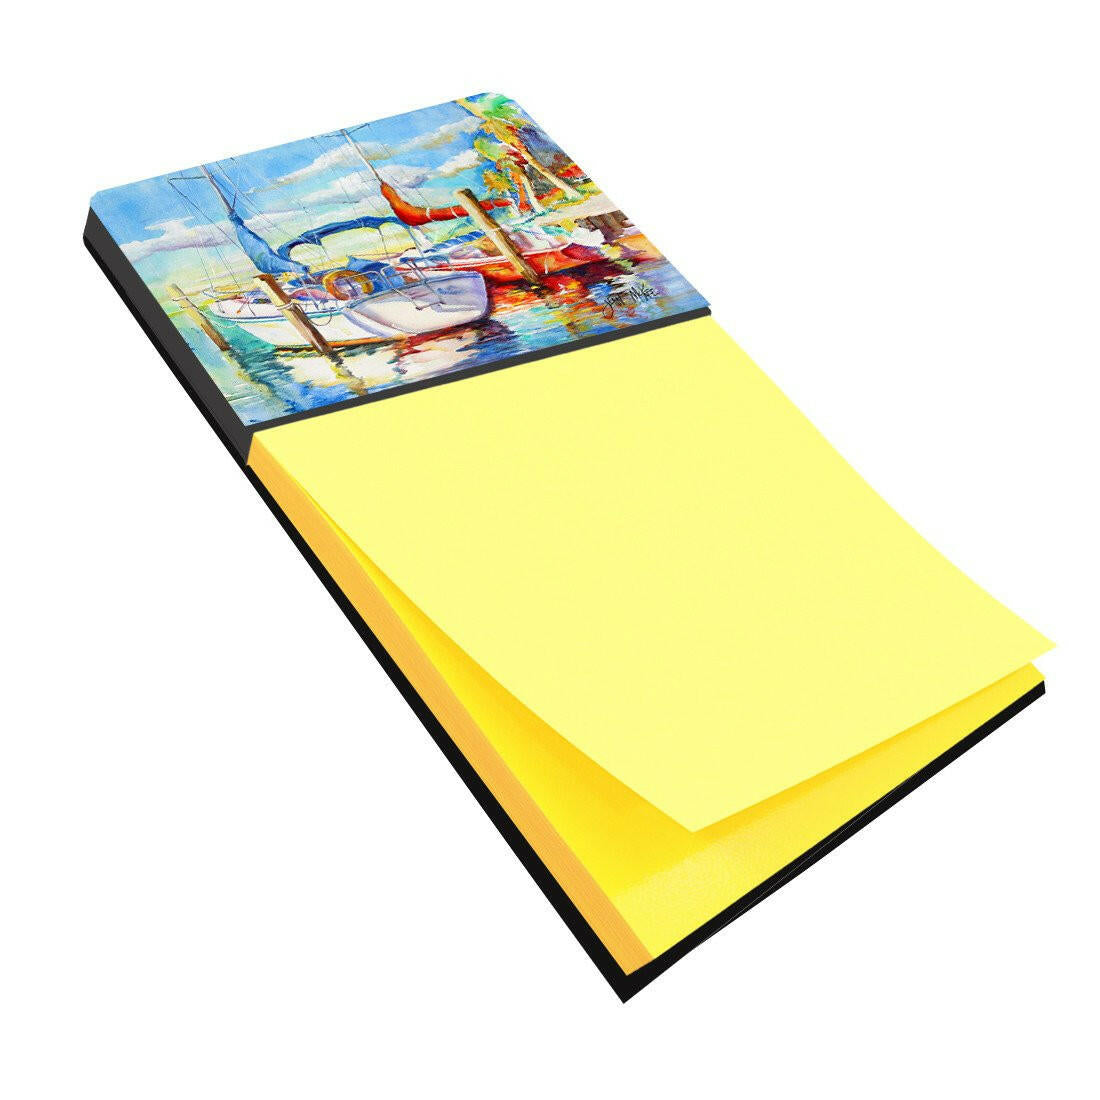 Towering Q Sailboat Sticky Note Holder JMK1088SN by Caroline's Treasures